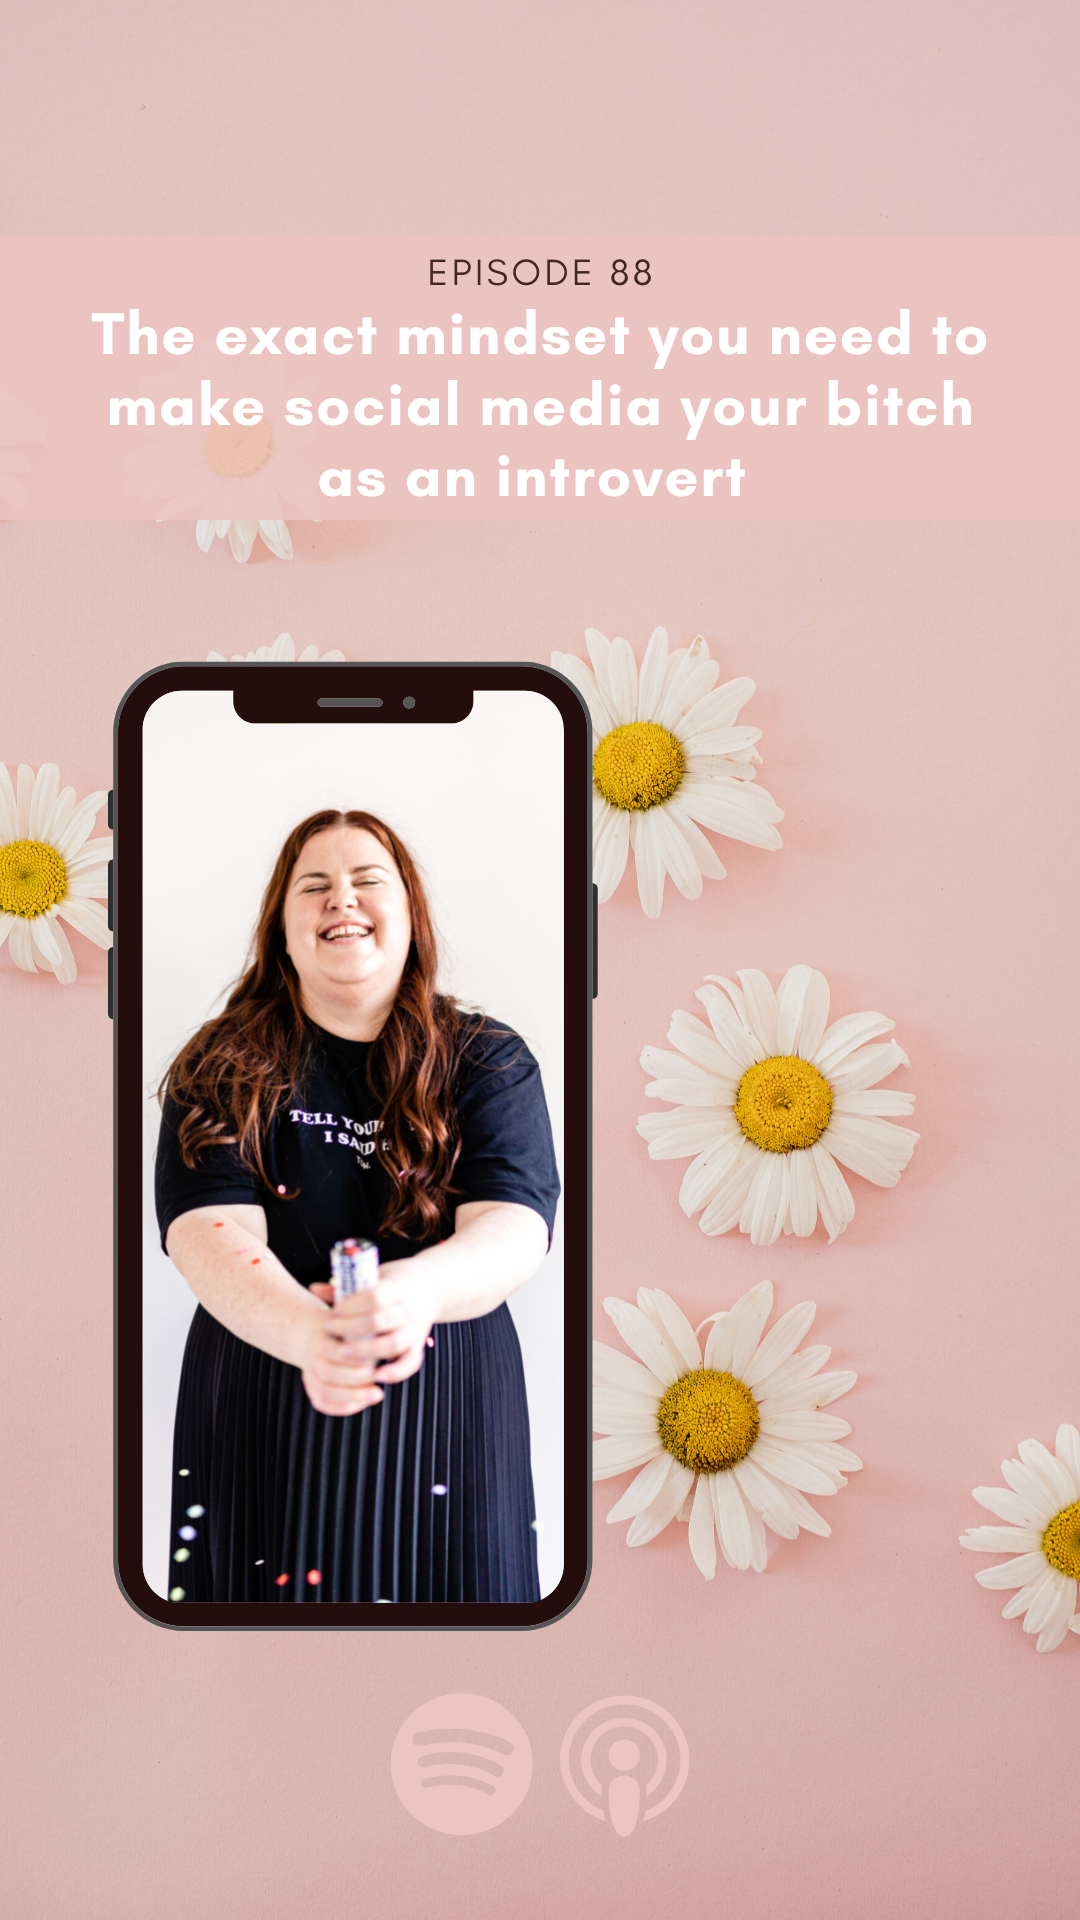 The exact mindset you need to make social media your bitch as an introvert 